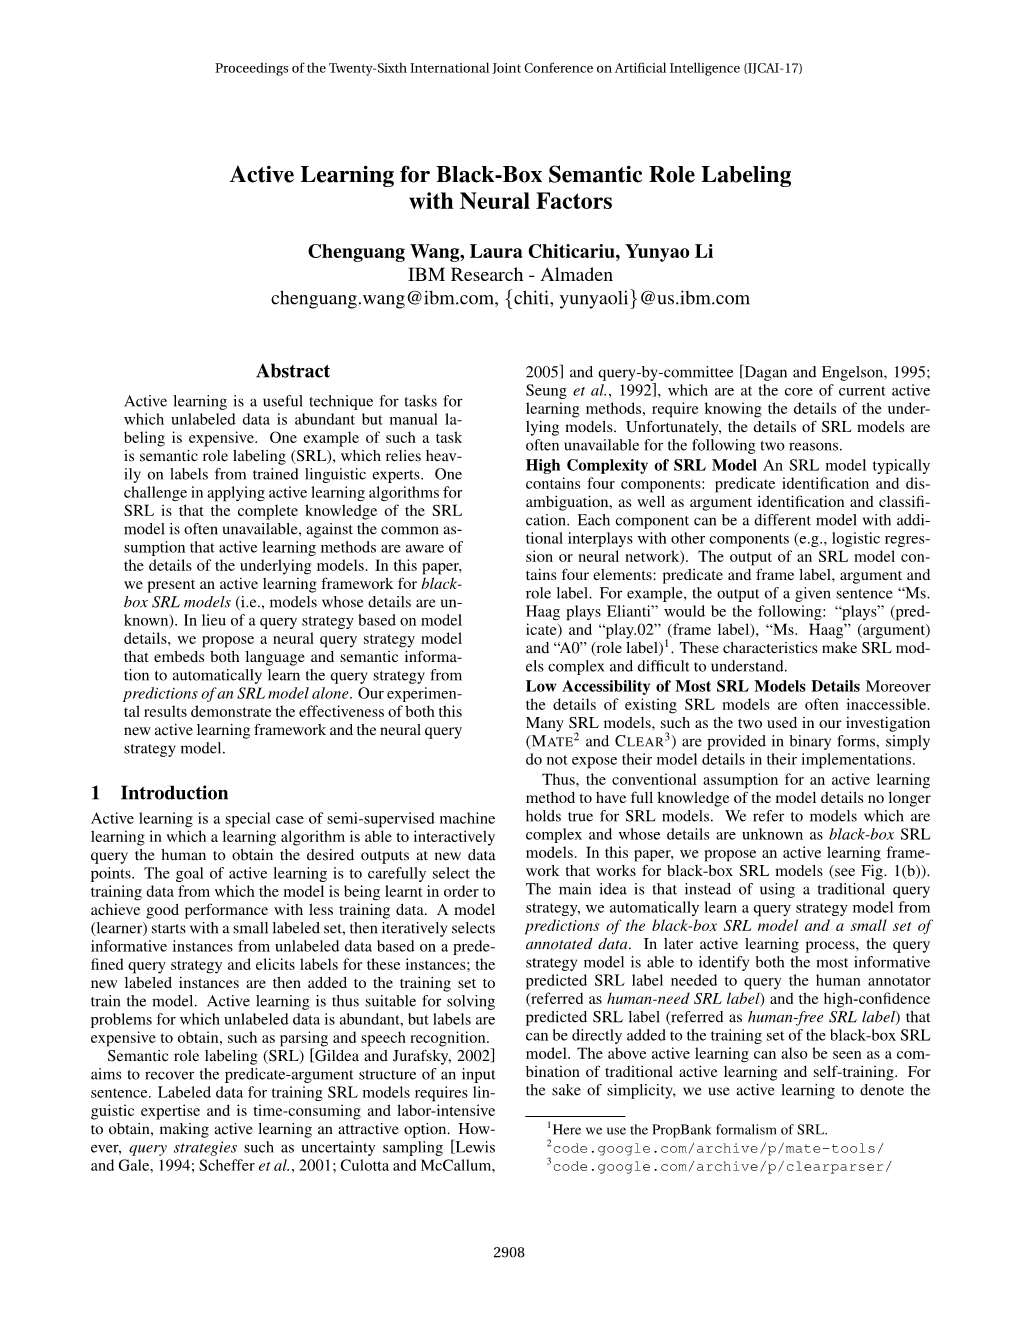 Active Learning for Black-Box Semantic Role Labeling with Neural Factors